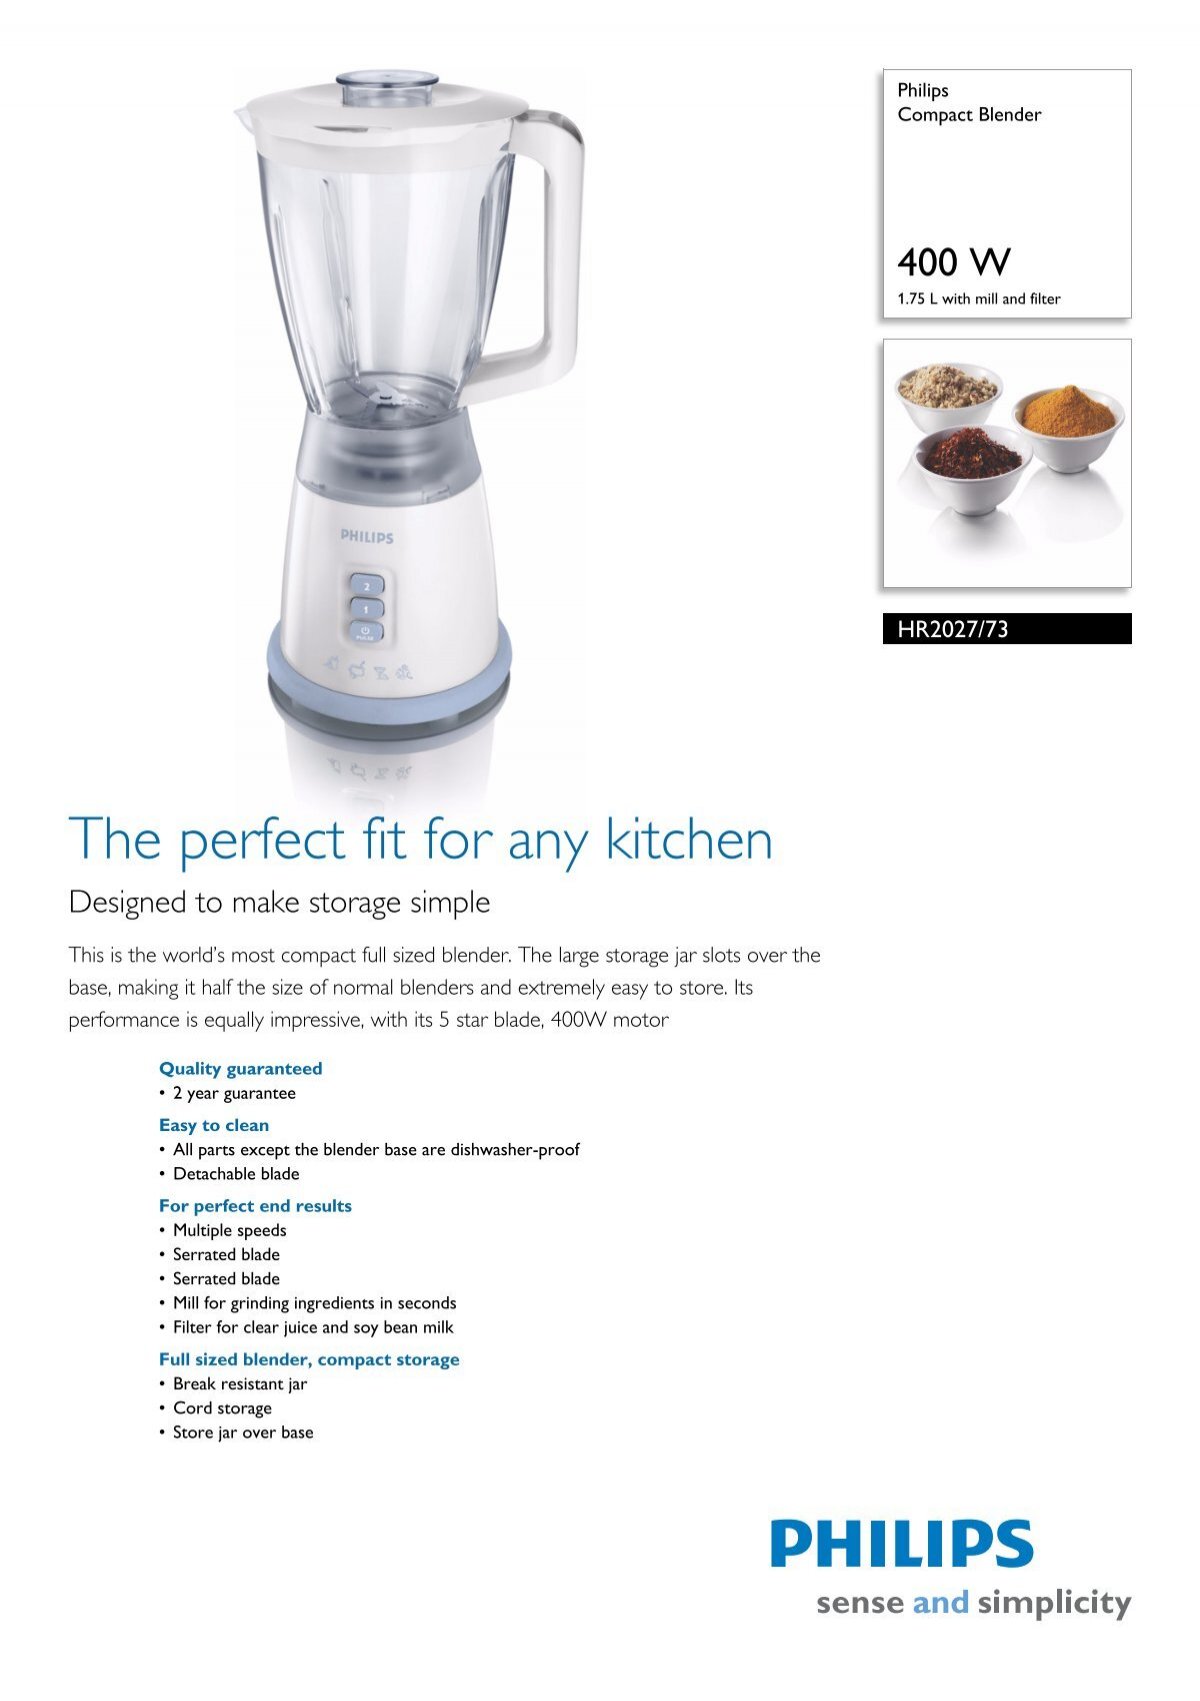 HR2027/73 Philips Compact Blender